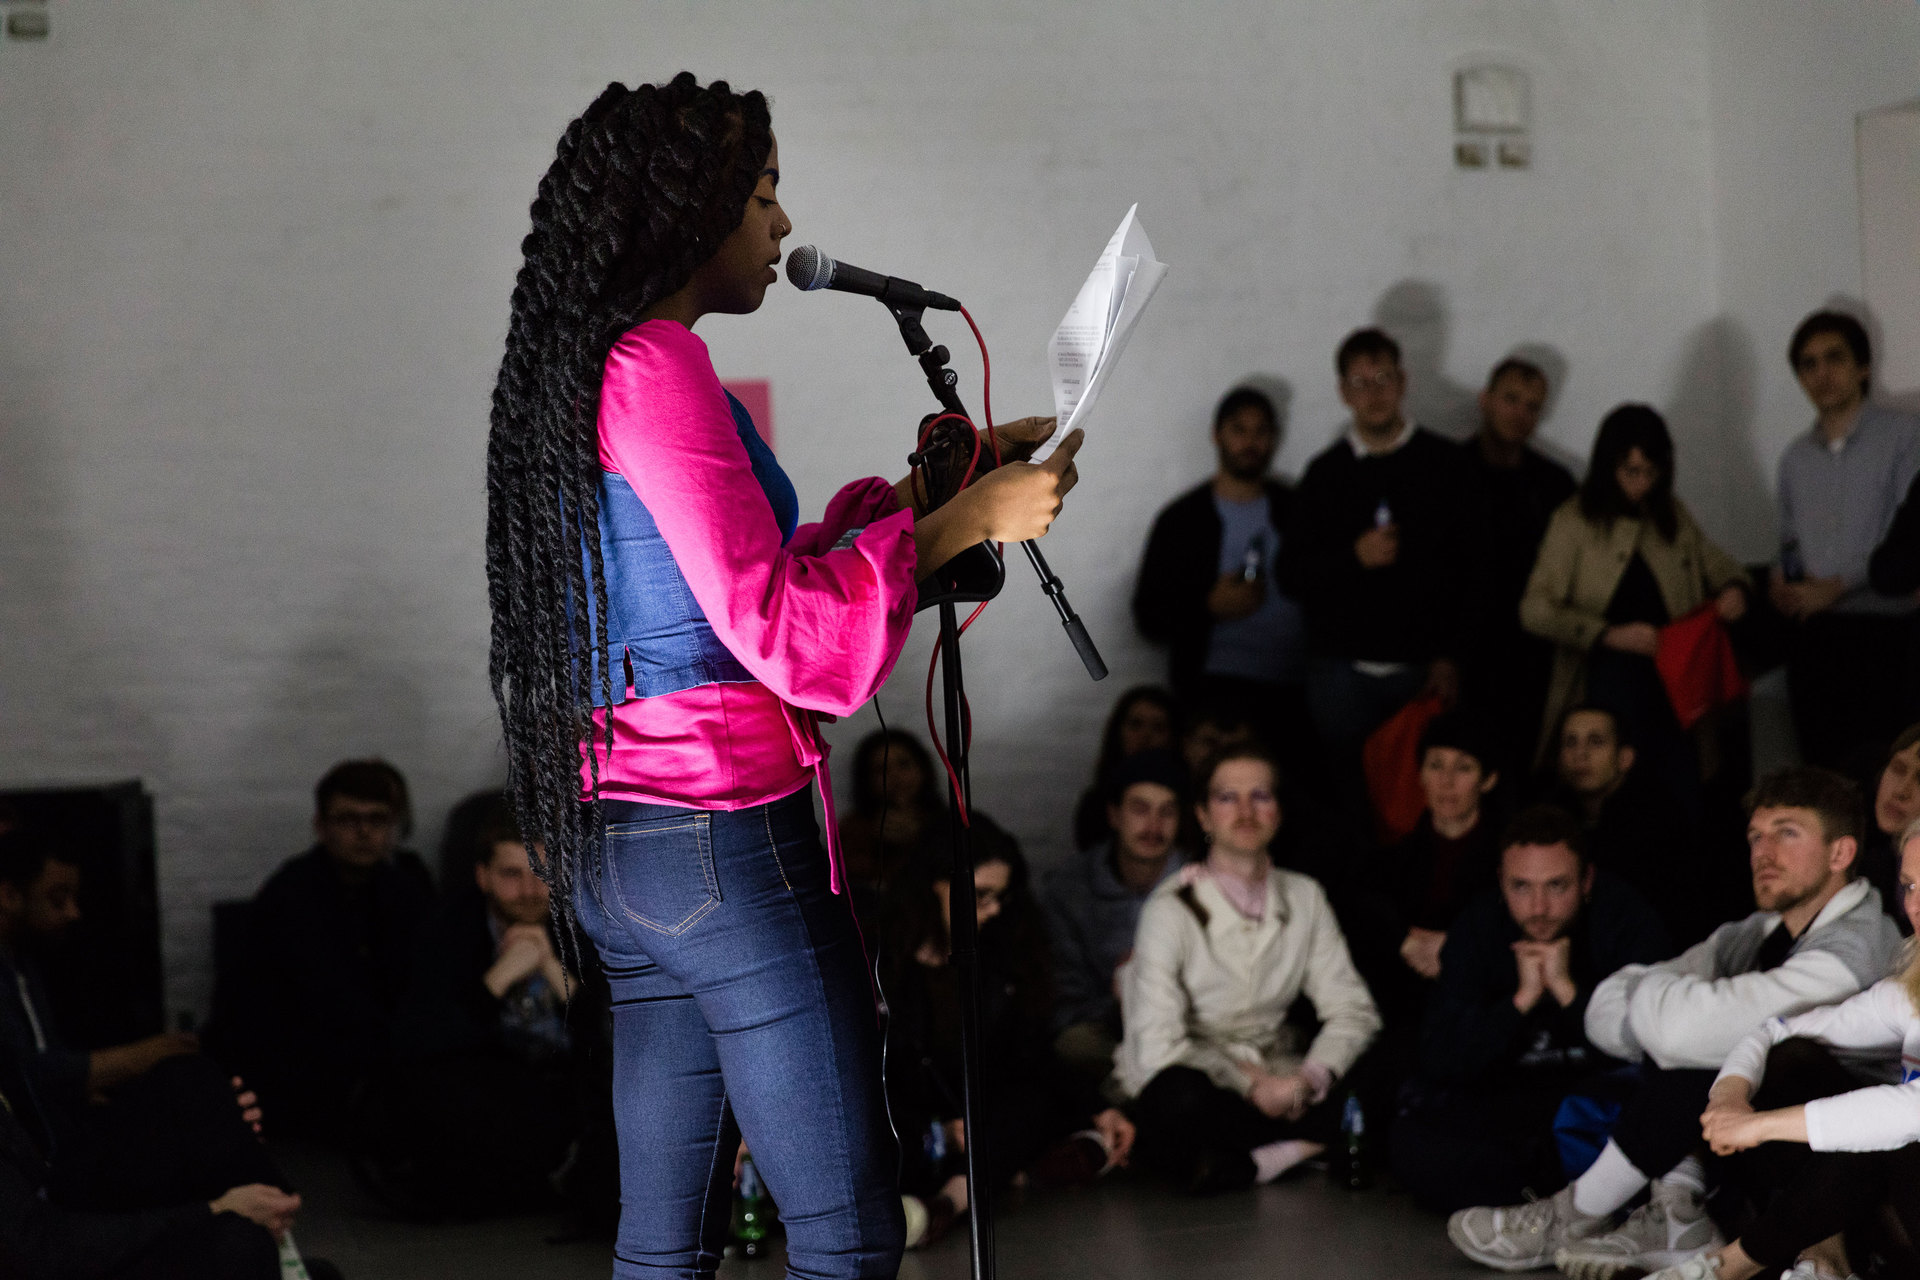 Juliana Huxtable reading, part of "Reading Pleasure" event, Cell Project Space, 2017